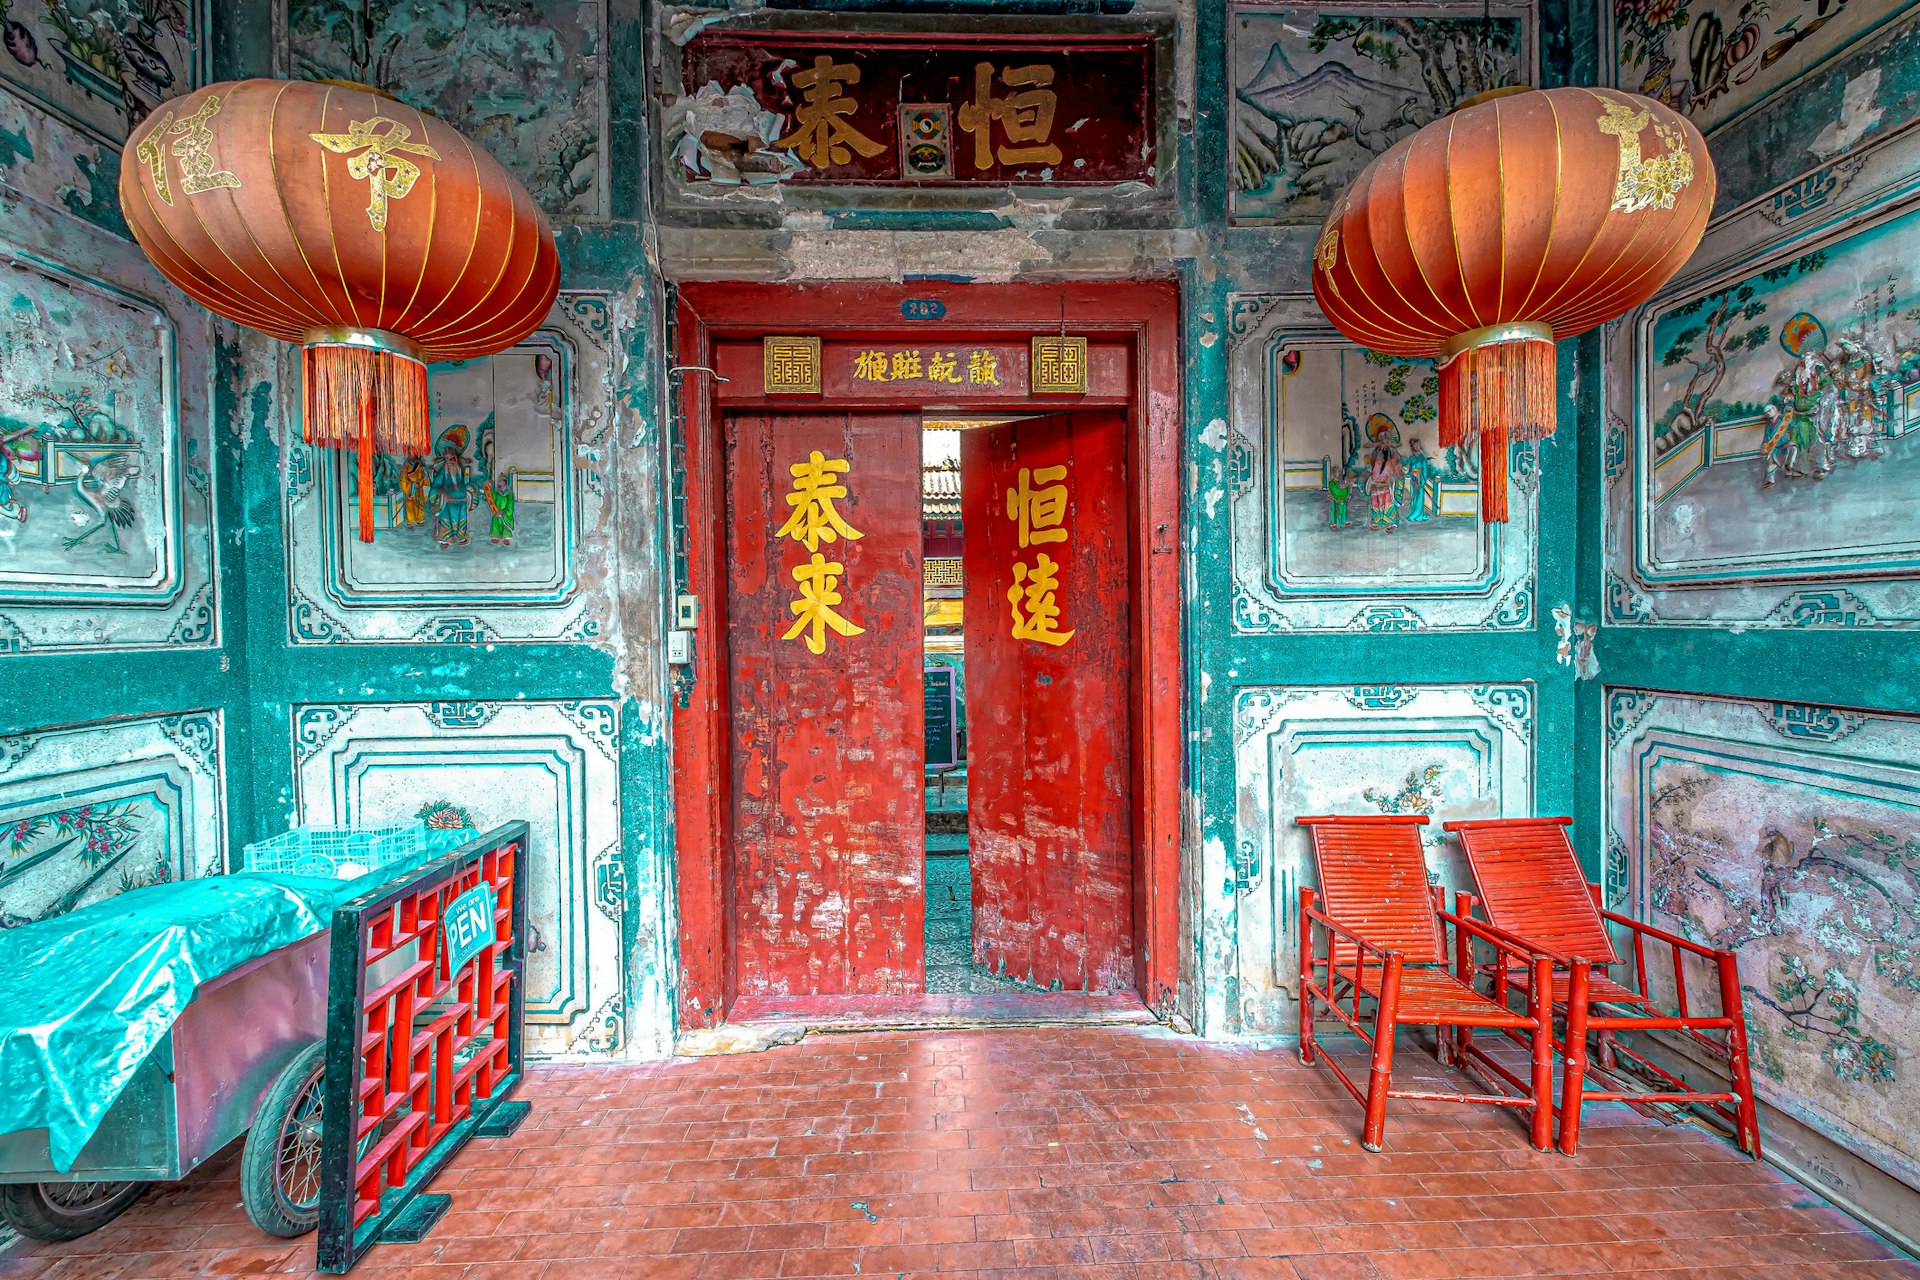 A Chinese-style temple door with red lanterns hanging either side of it